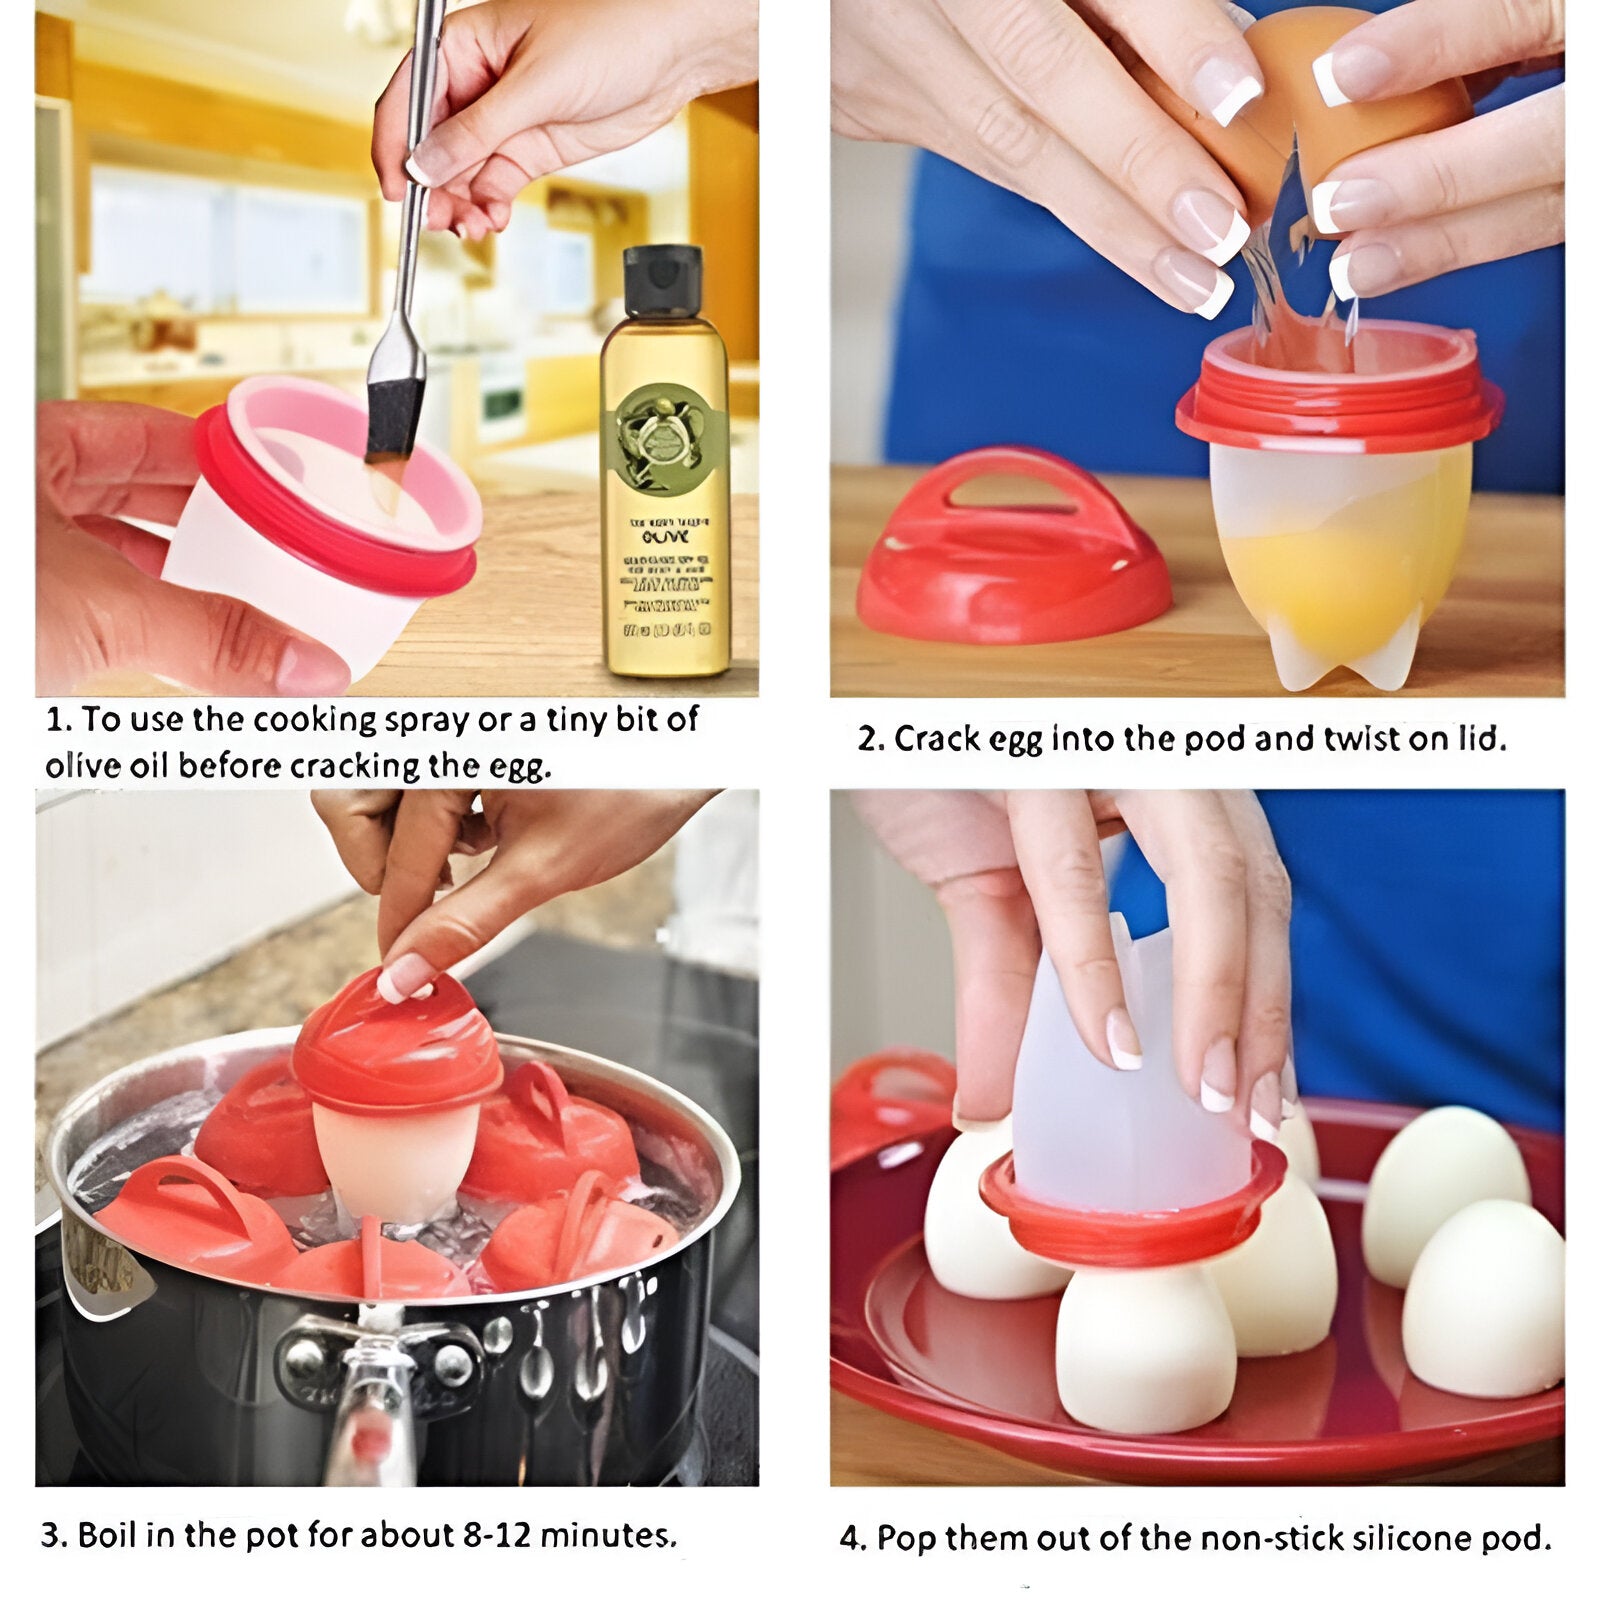 CAPSULES FOR COOKING EGGS